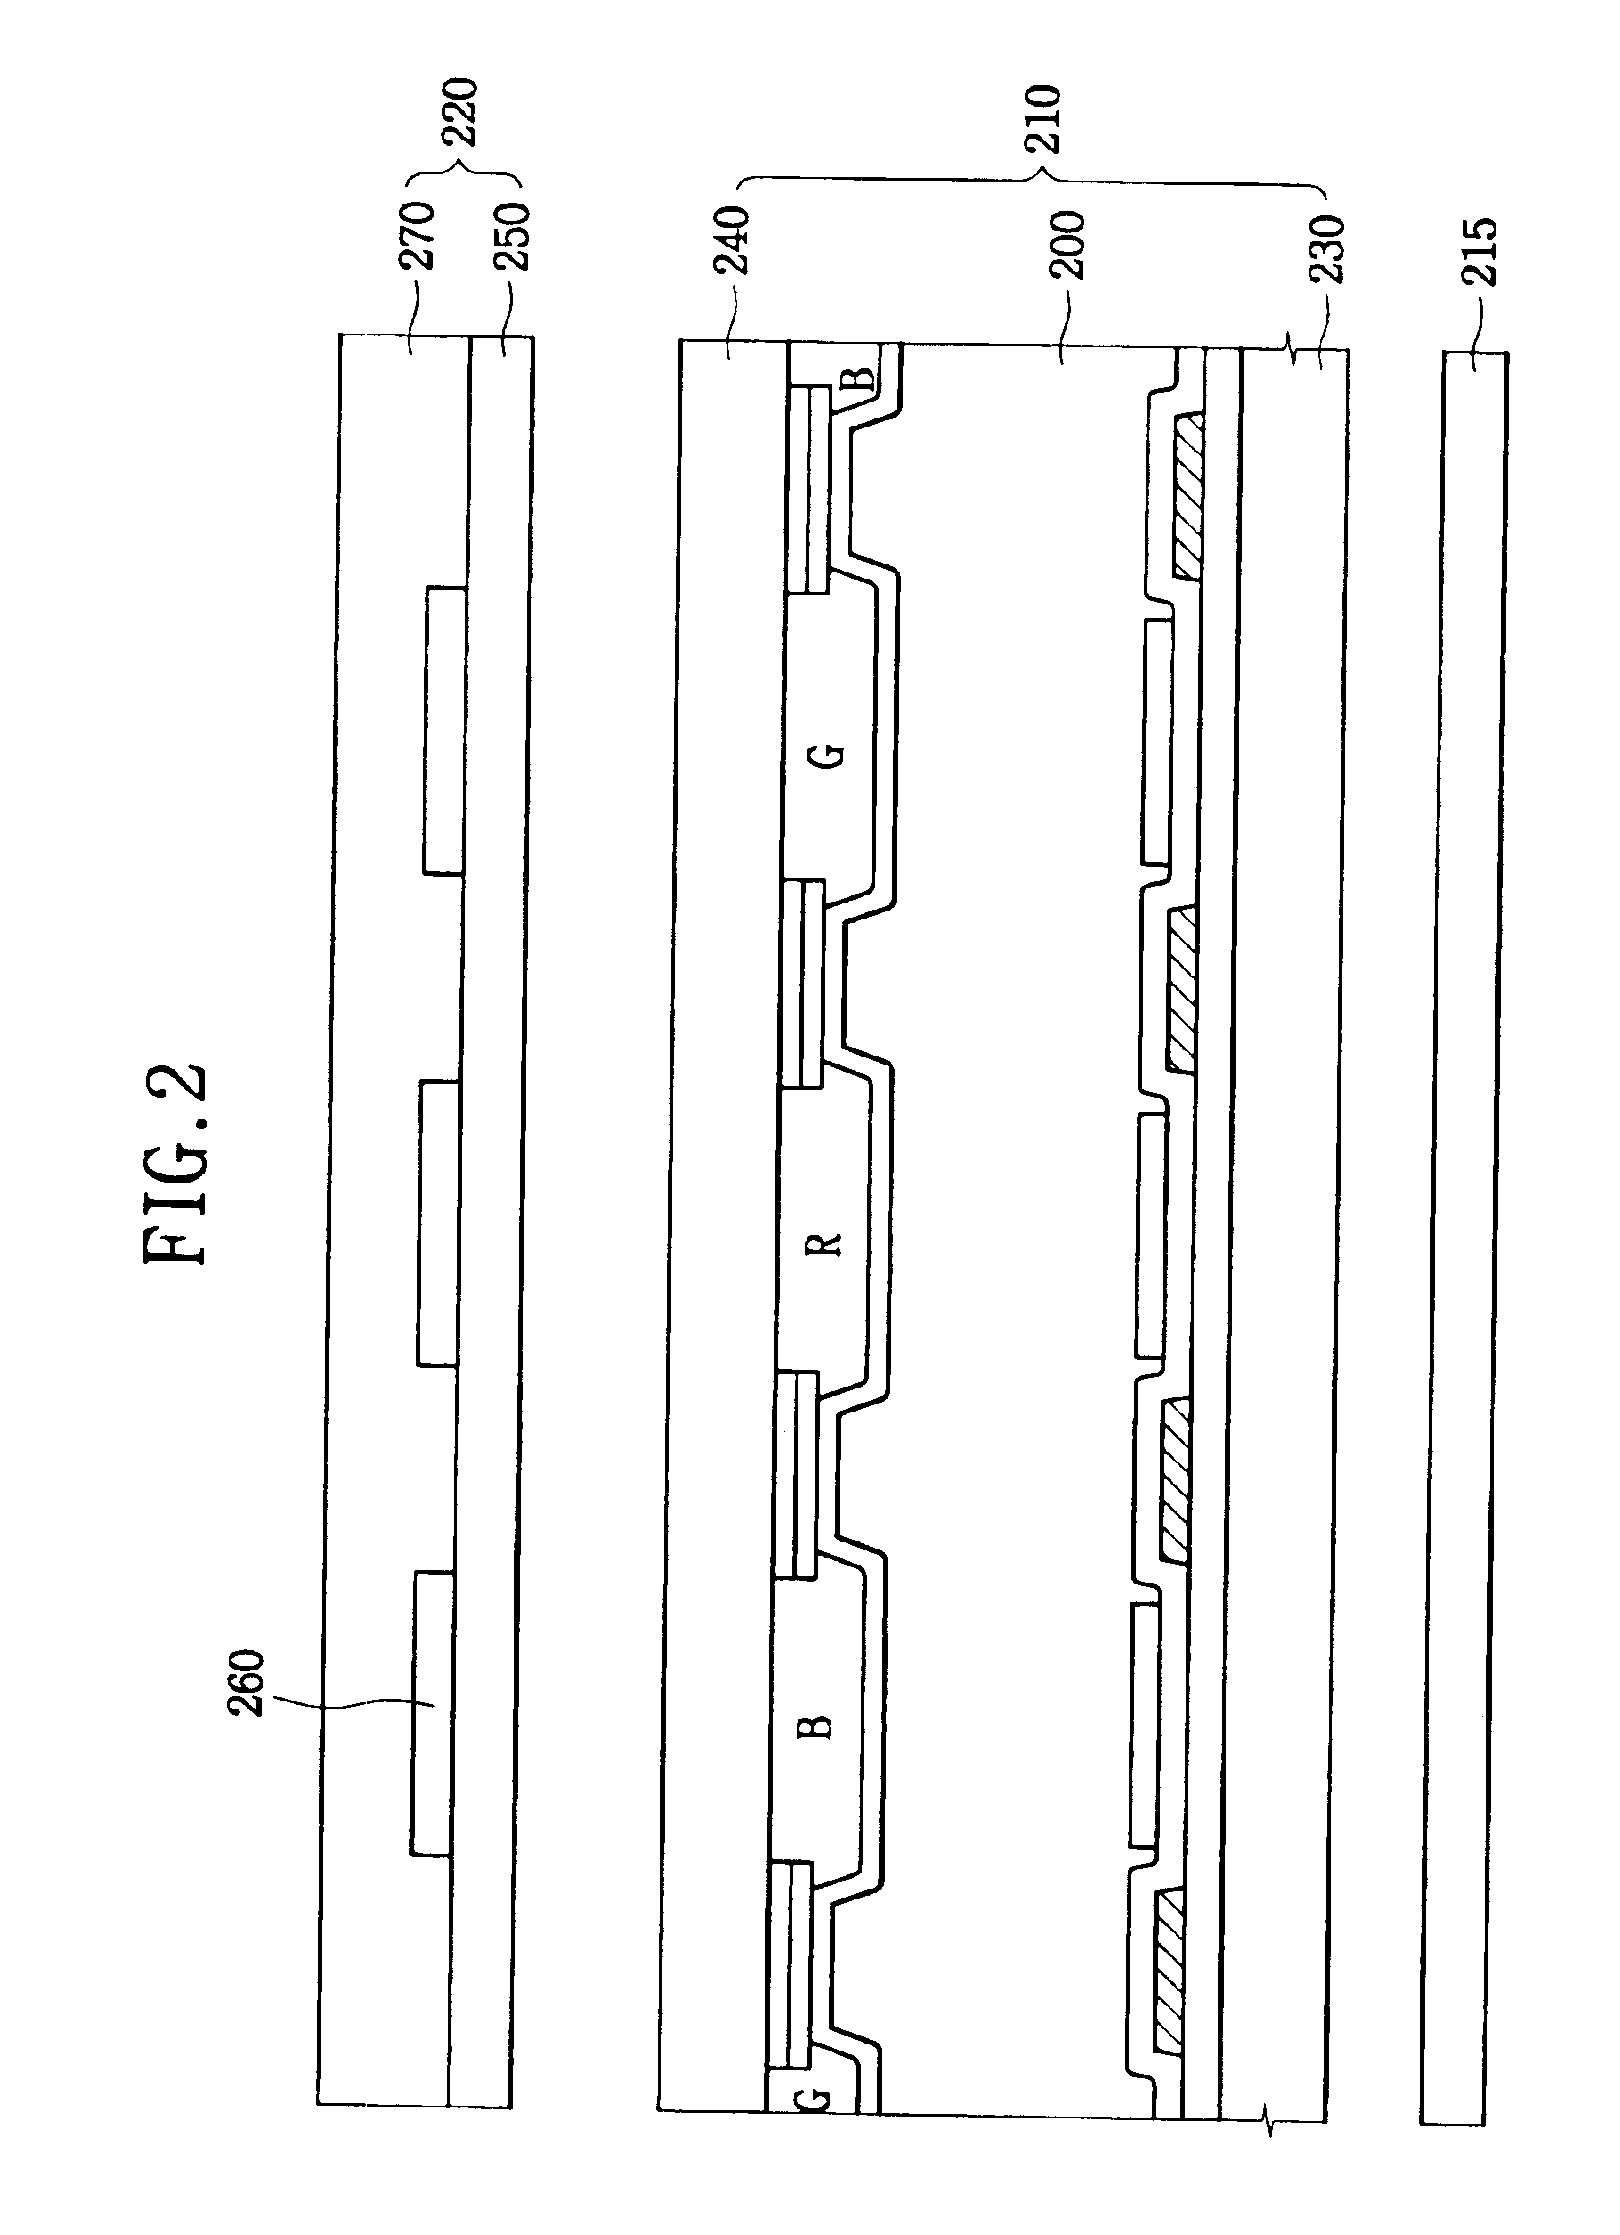 Image recognition device and liquid crystal display apparatus having the same